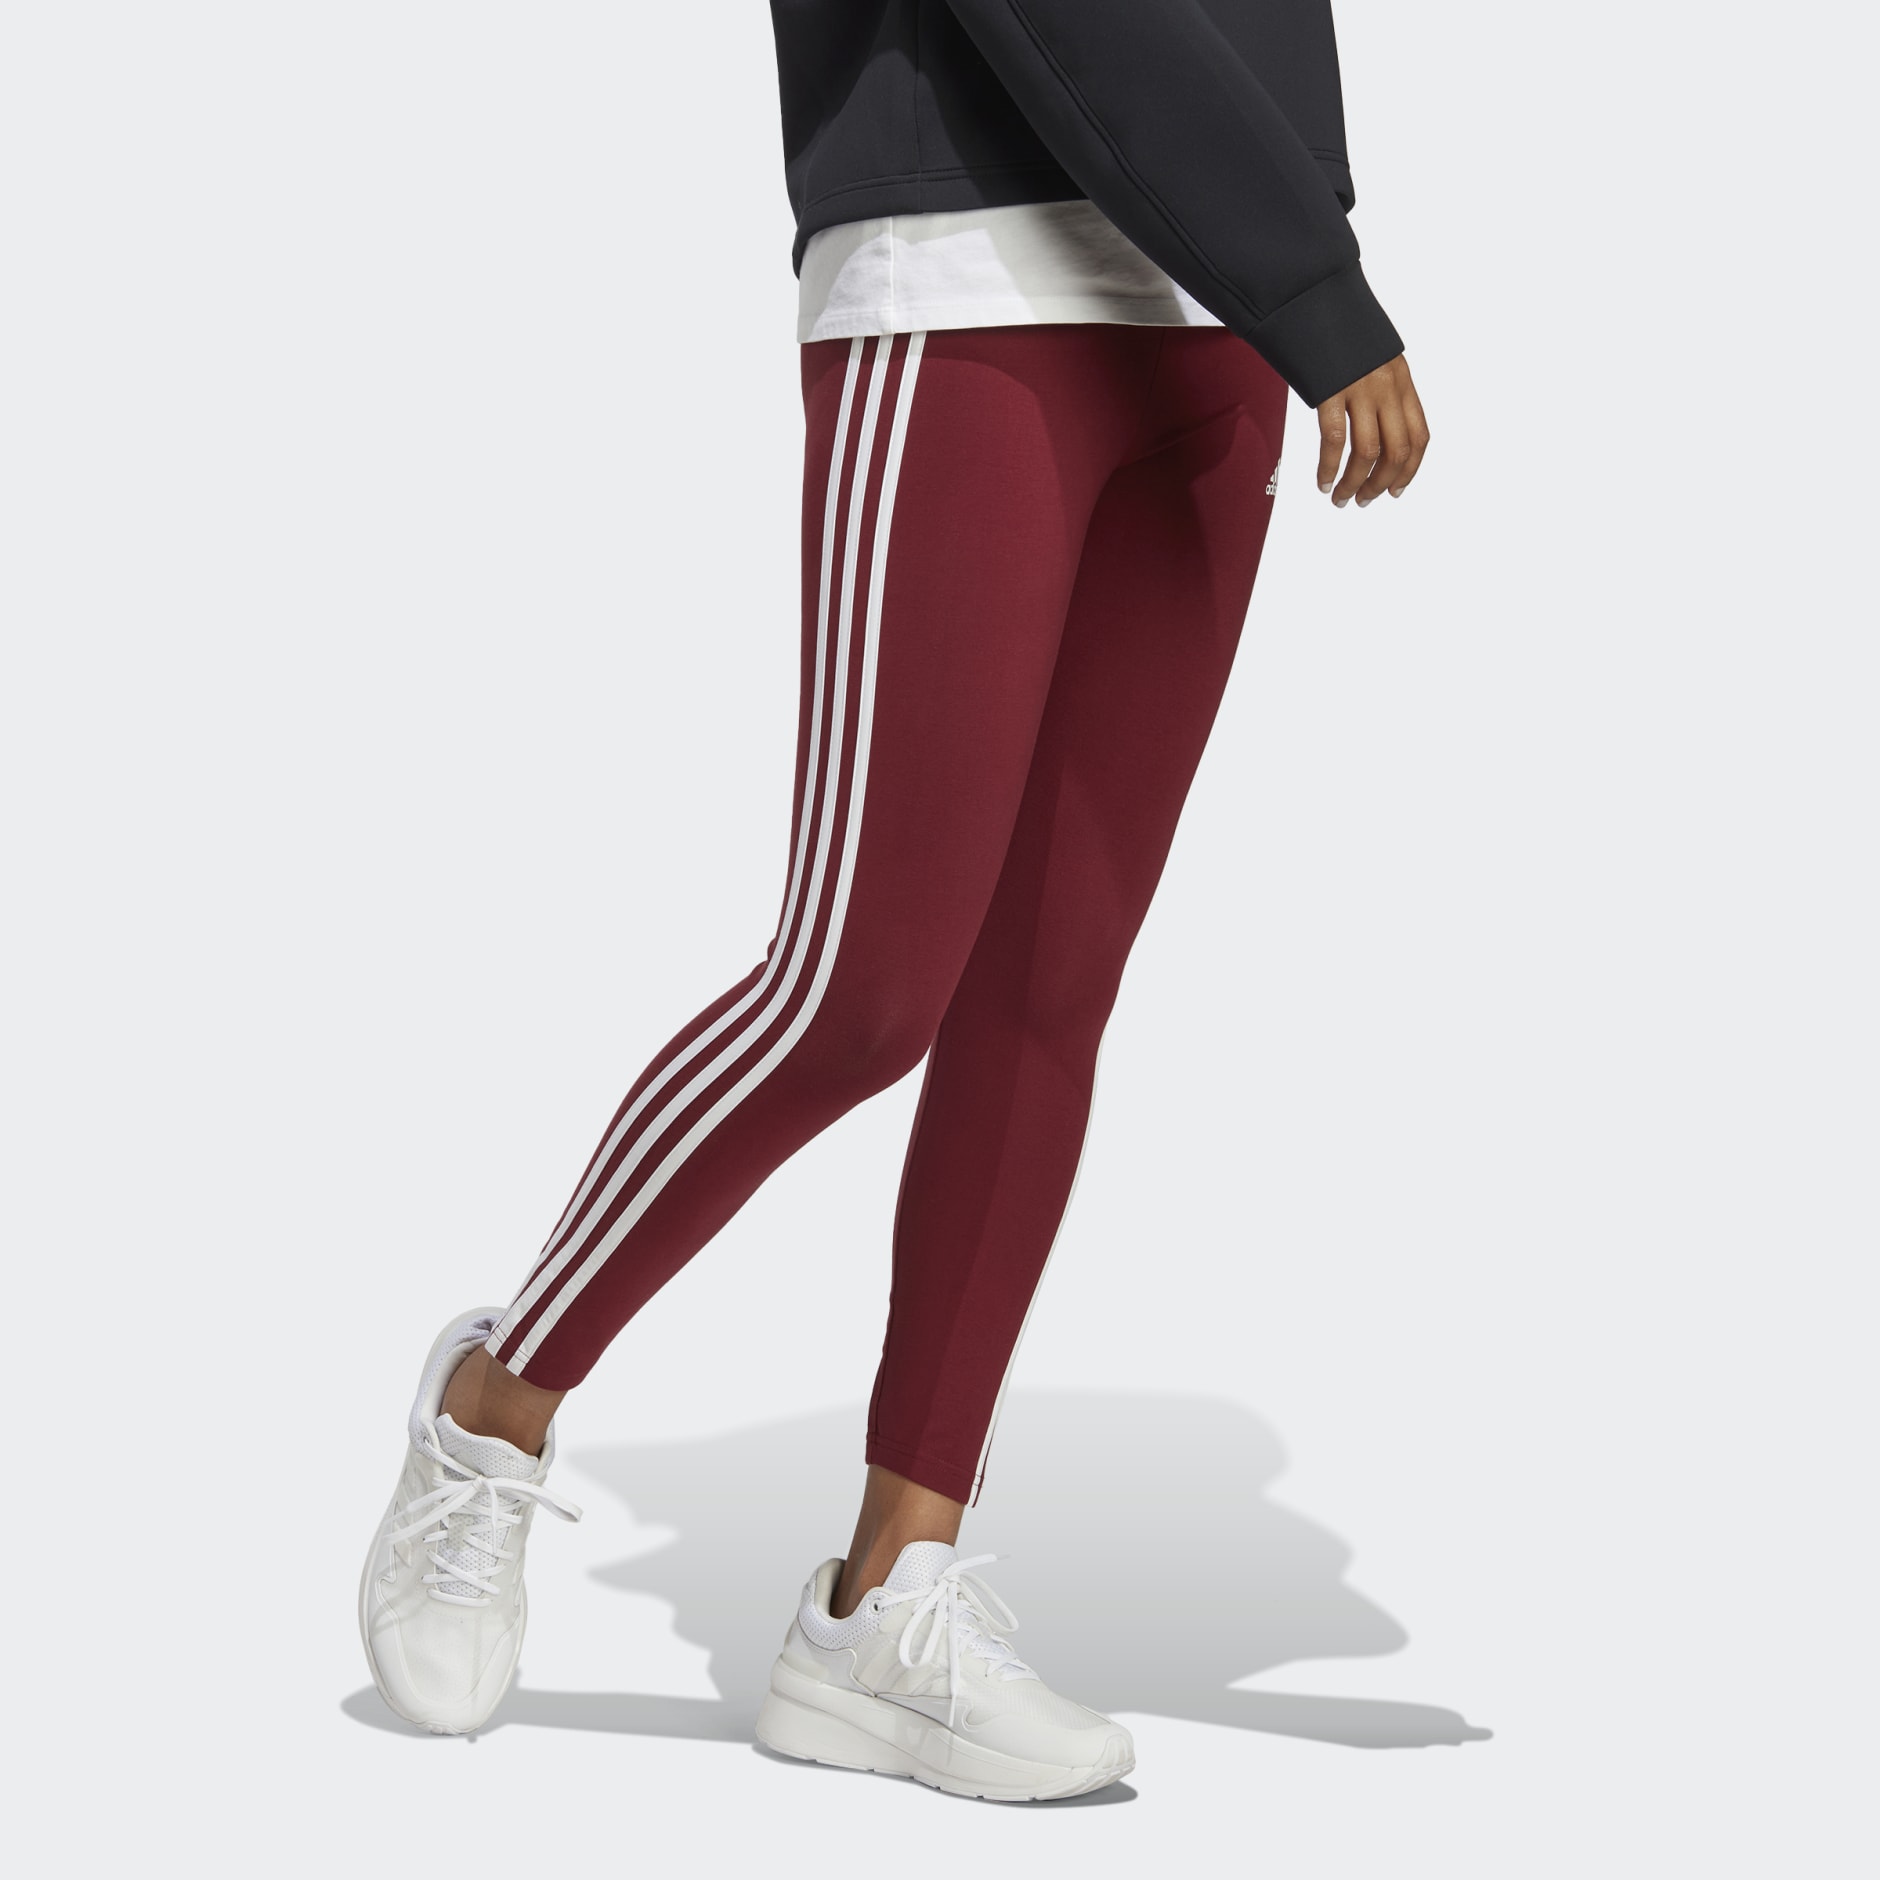 Women's Clothing - Essentials 3-Stripes High-Waisted Single Jersey Leggings  - Burgundy